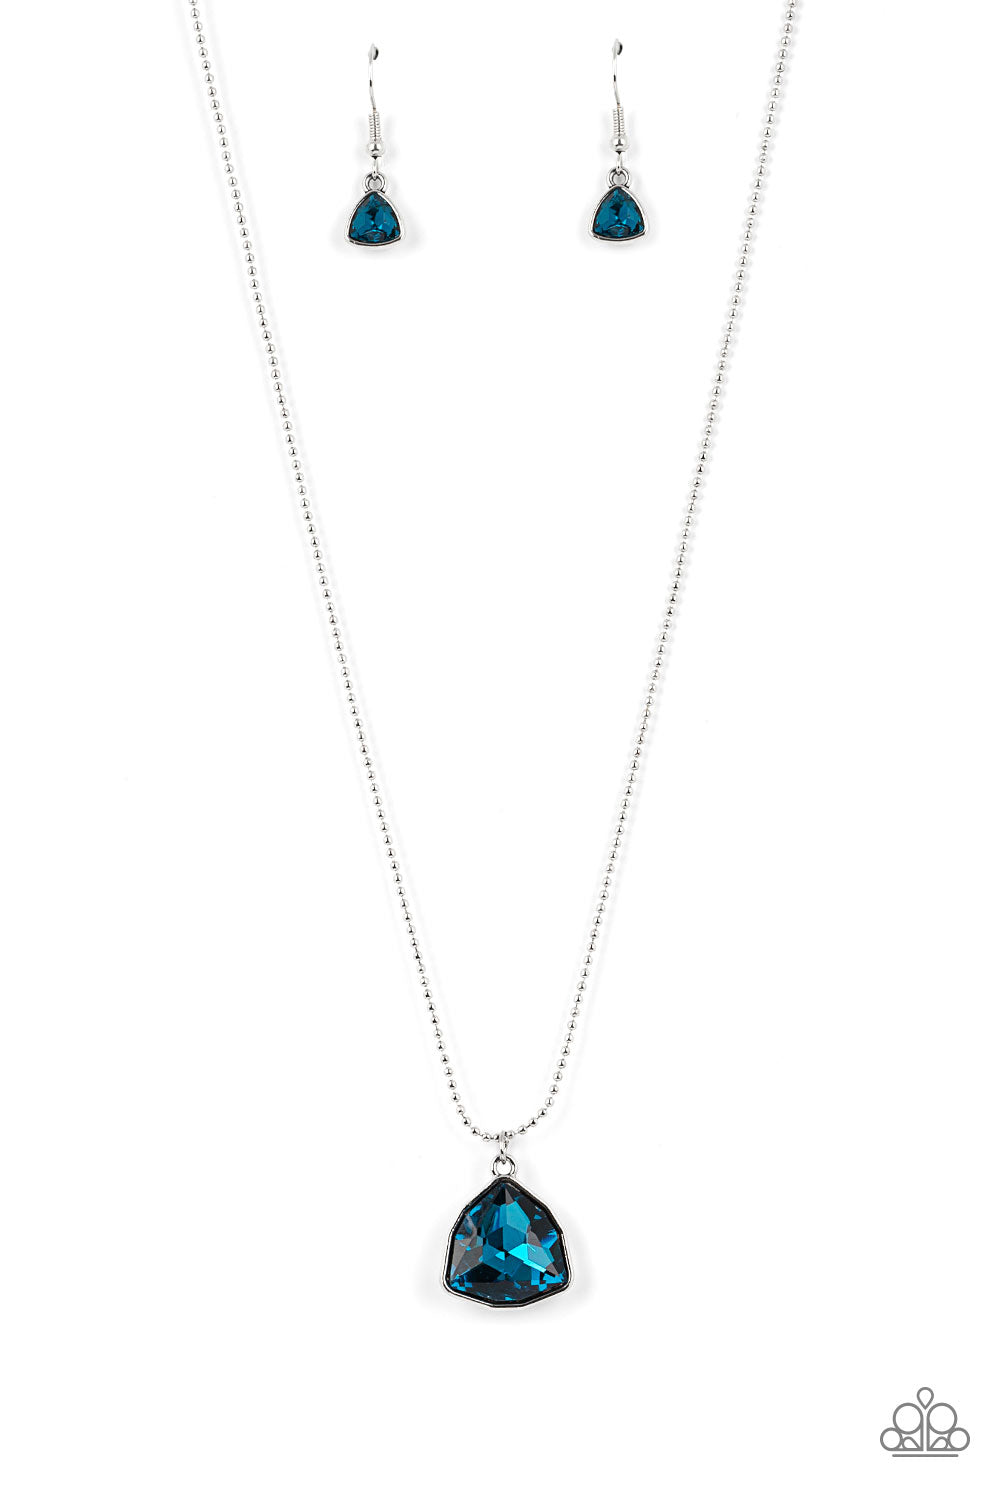 Galactic Duchess - Blue - Paparazzi - A faceted asymmetrical blue gem is encased in a sleek silver frame at the bottom of a silver popcorn chain, creating a stellar pendant below the collar.